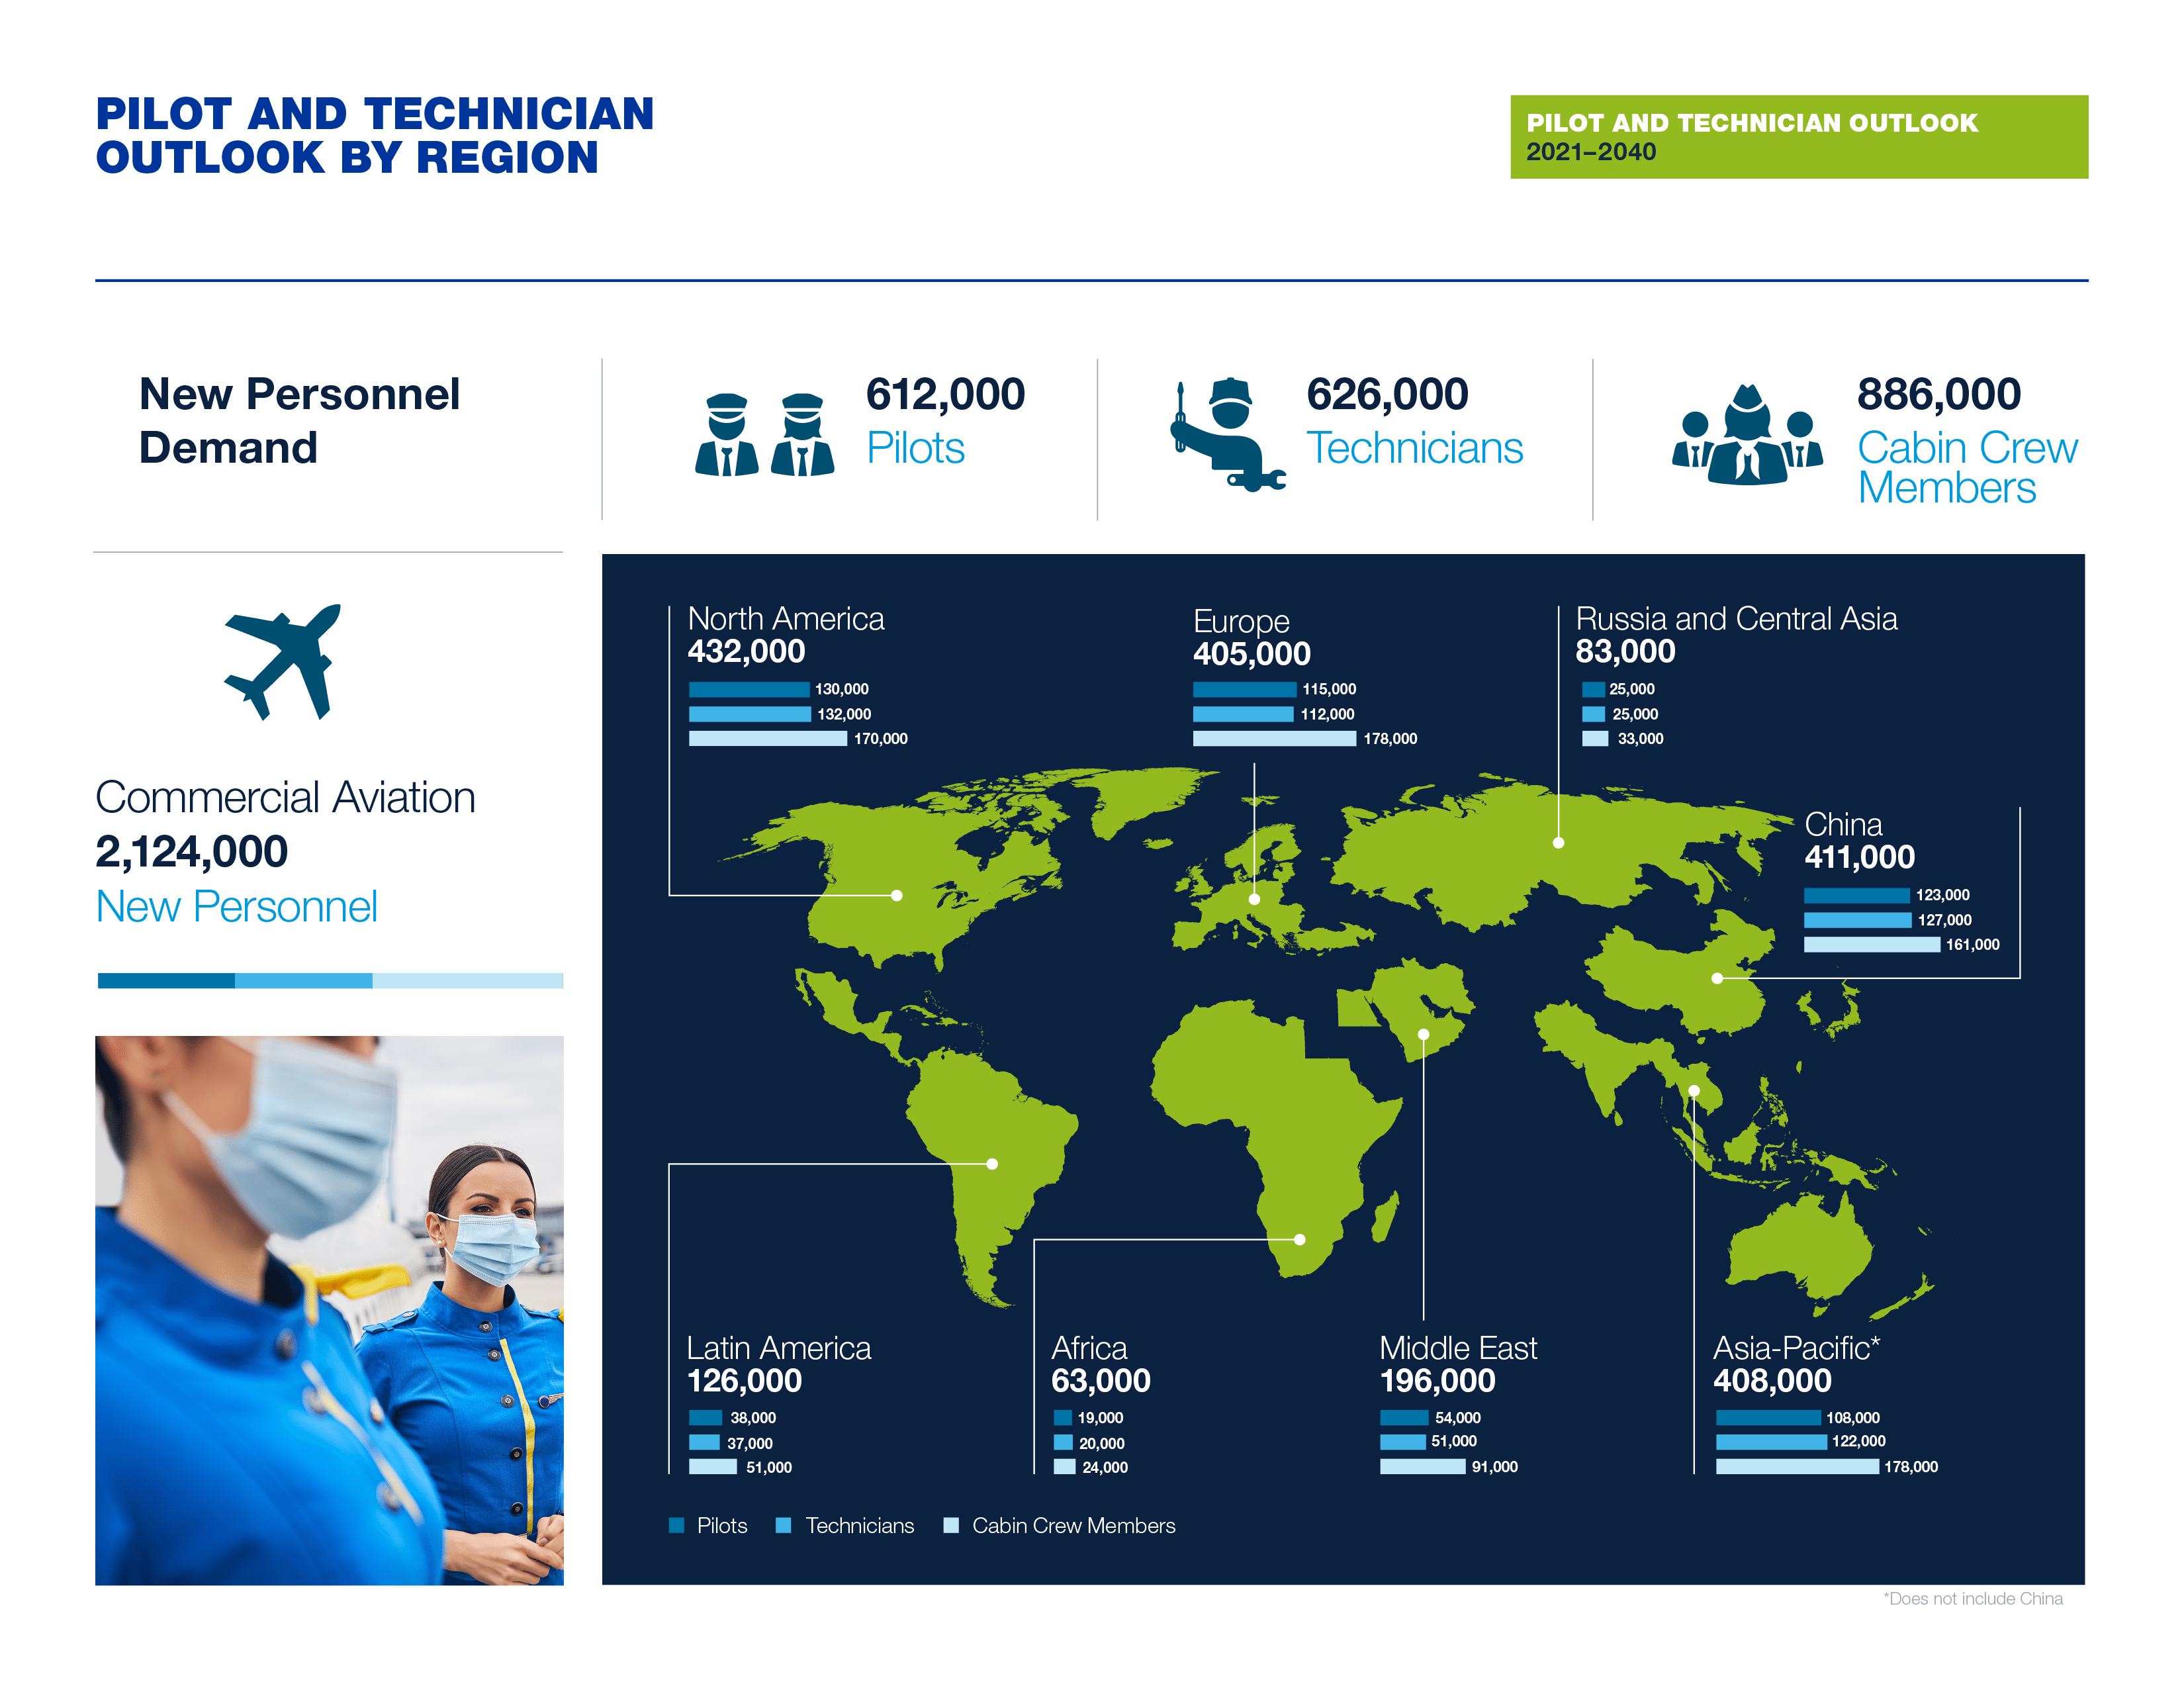 boeing pilot and technician outlook 2021-2040